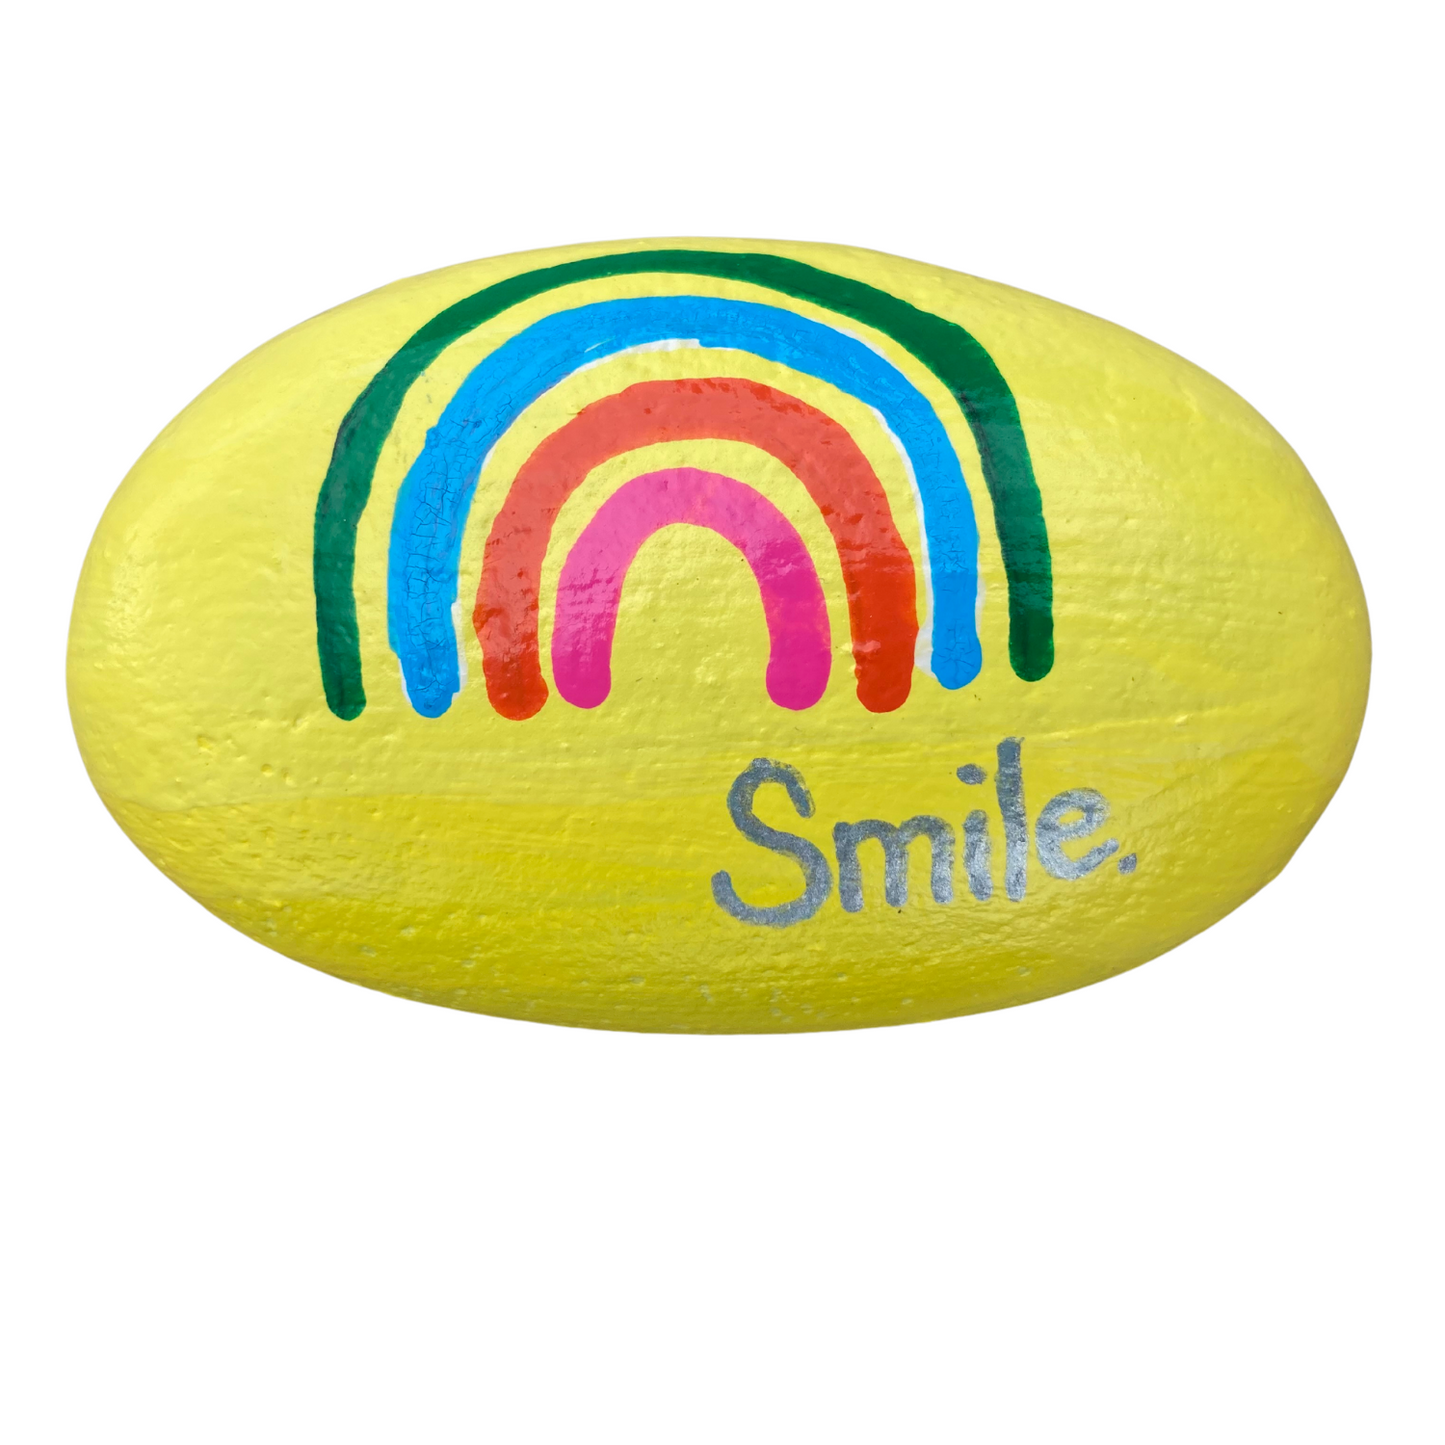 The Smile Rock - Variety selection